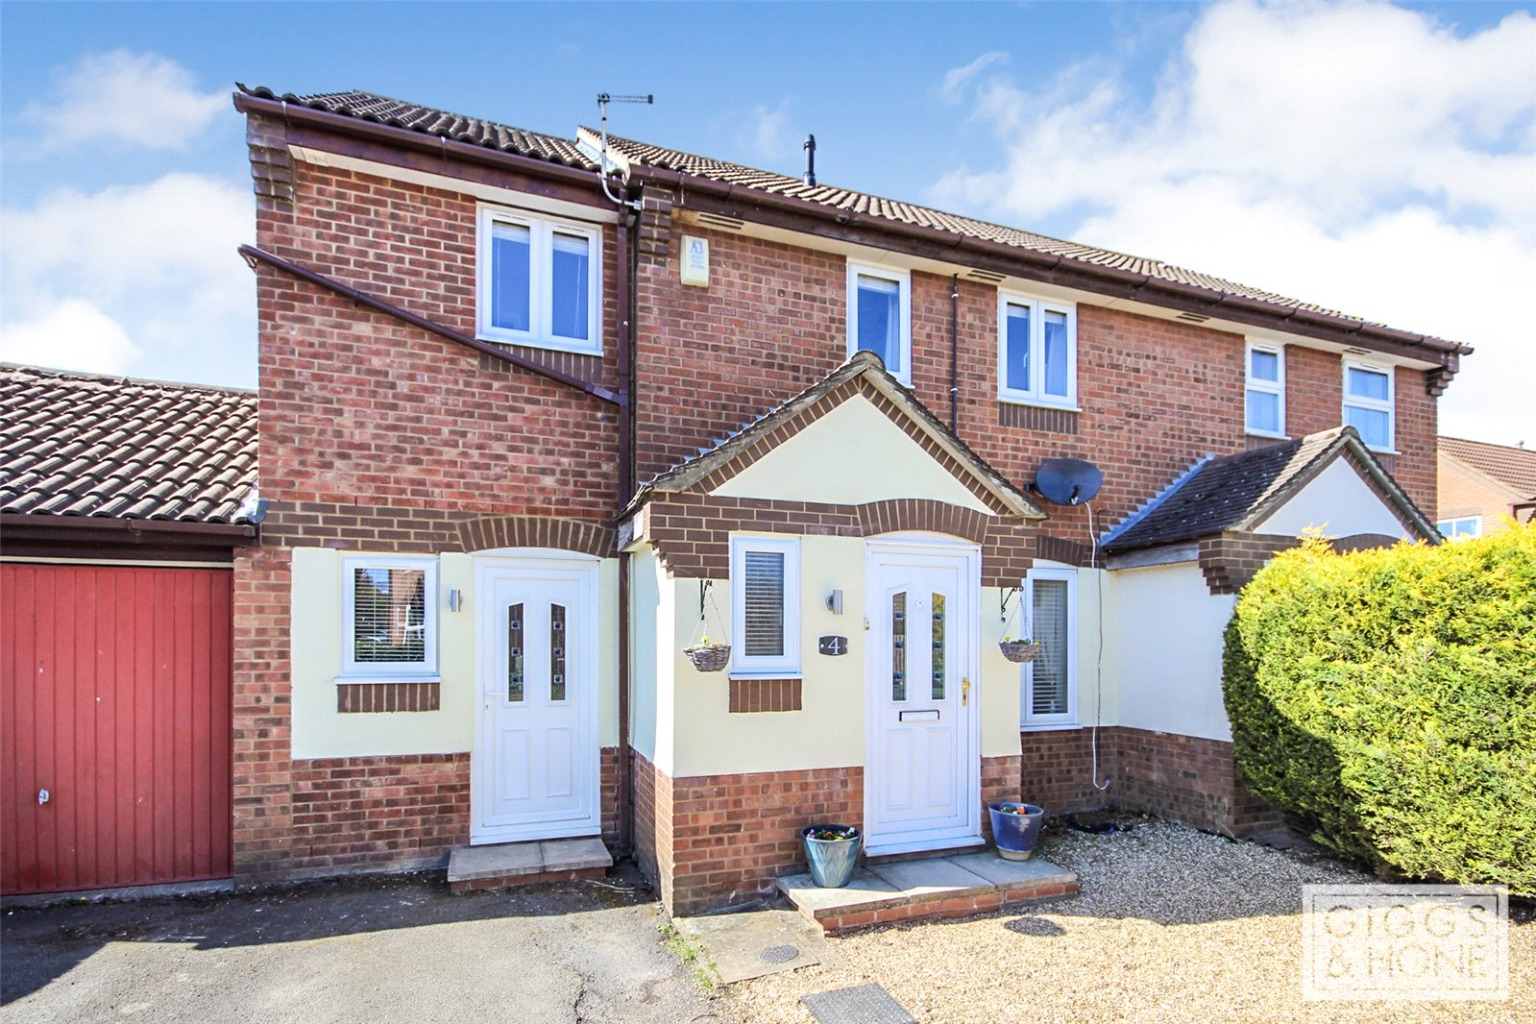 3 bed semi-detached house for sale in Gadsden Close, Bedford - Property Image 1